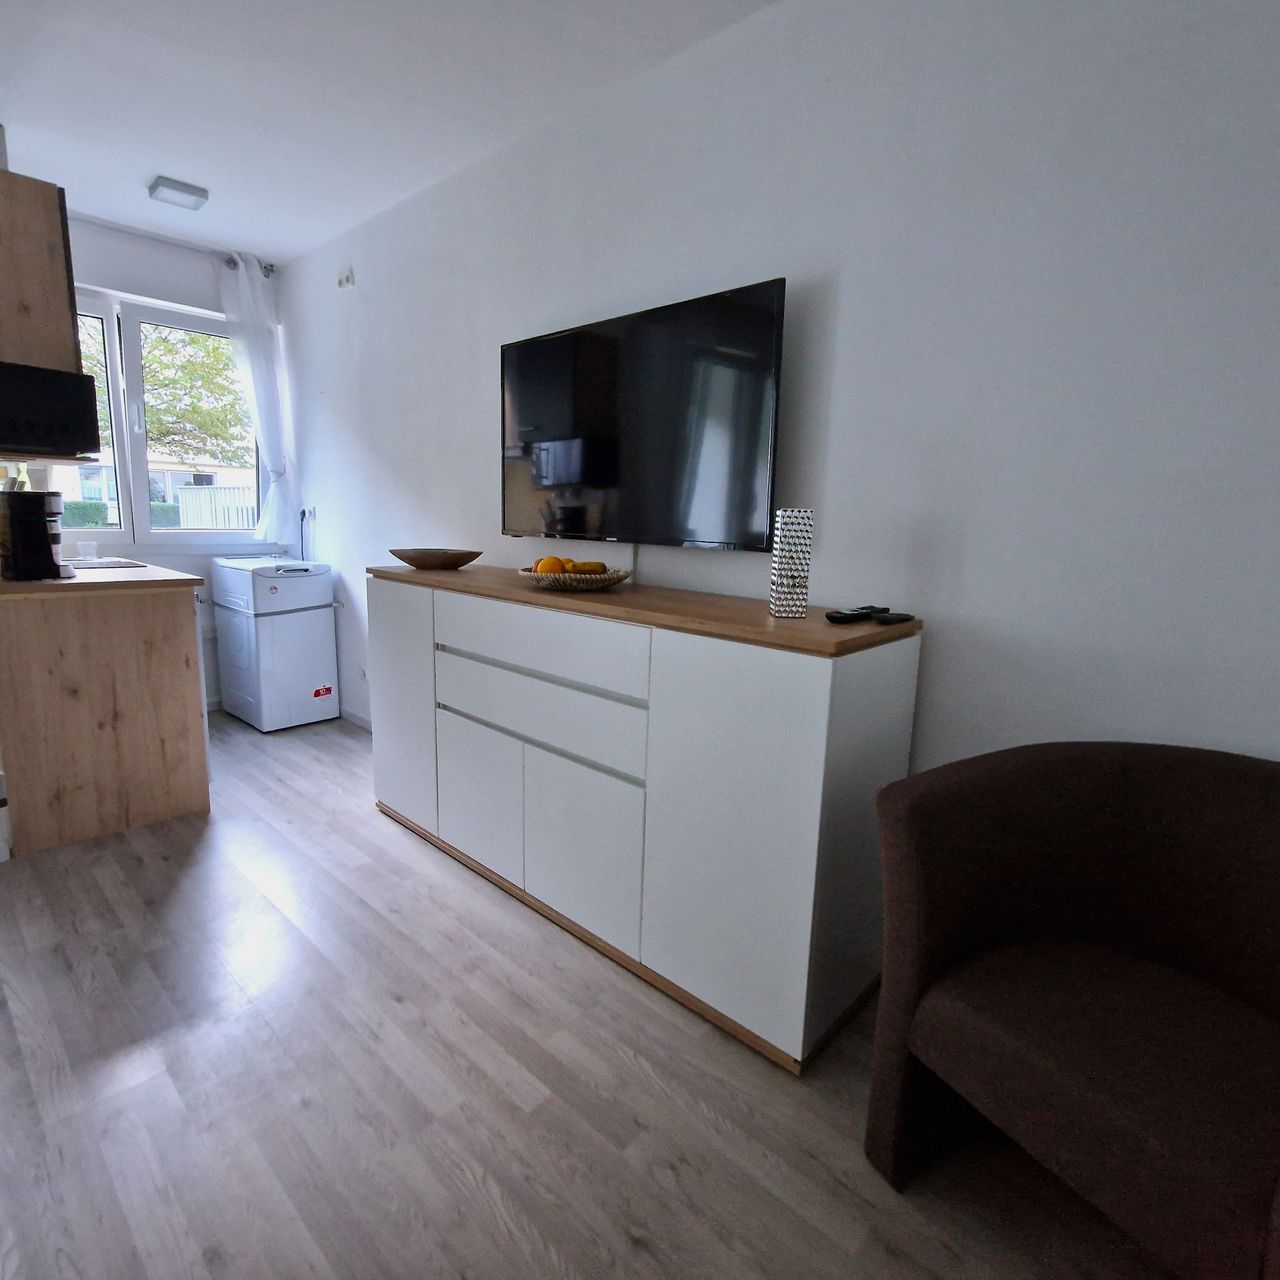 Fully equipped, quiet and just renovated flat (Schwabing/Munich)